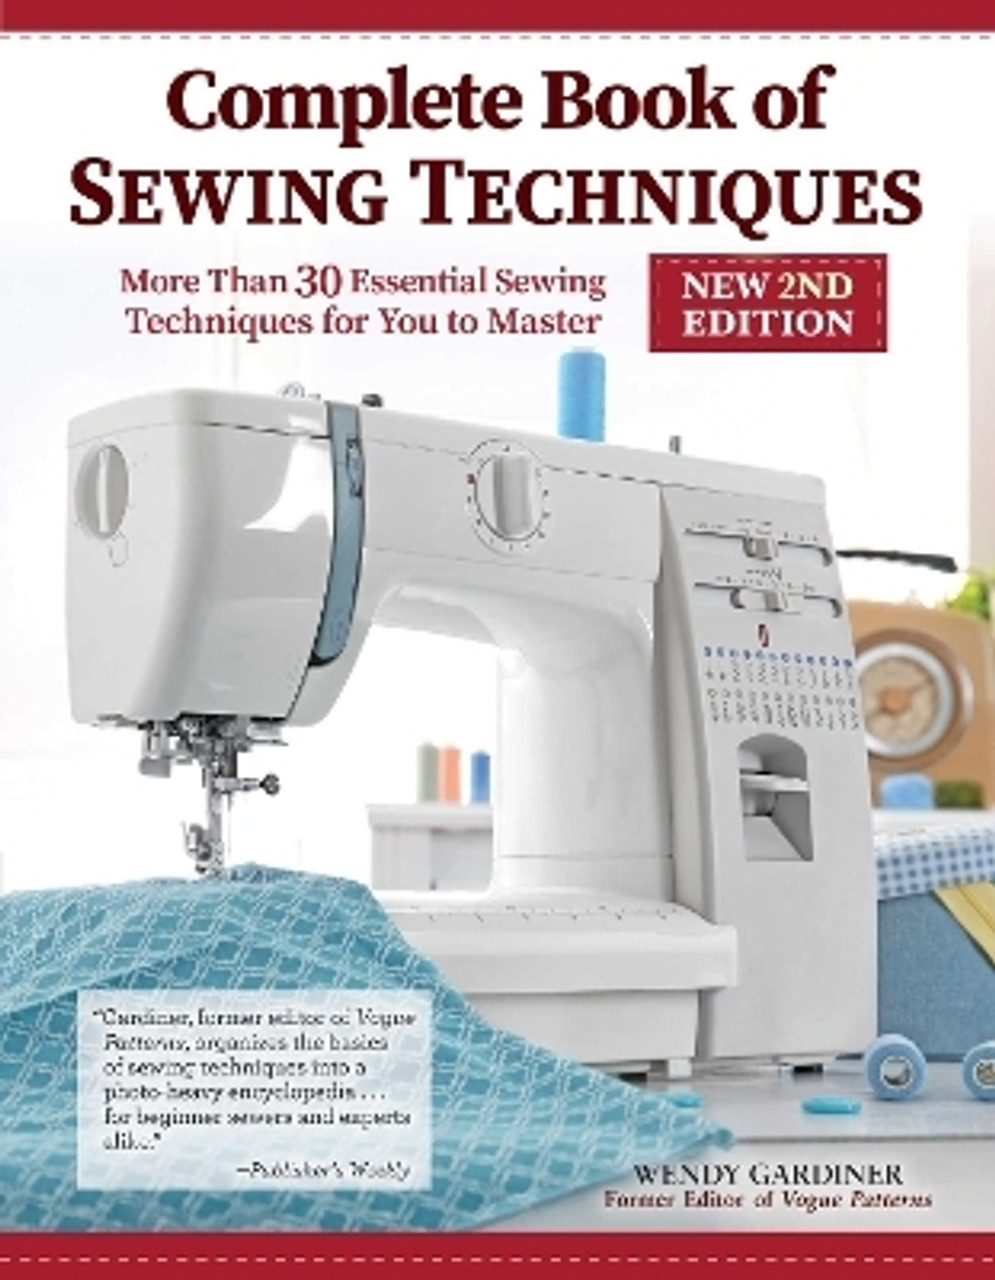 Complete Book of Sewing Techniques (2nd Edition) by Wendy Gardiner